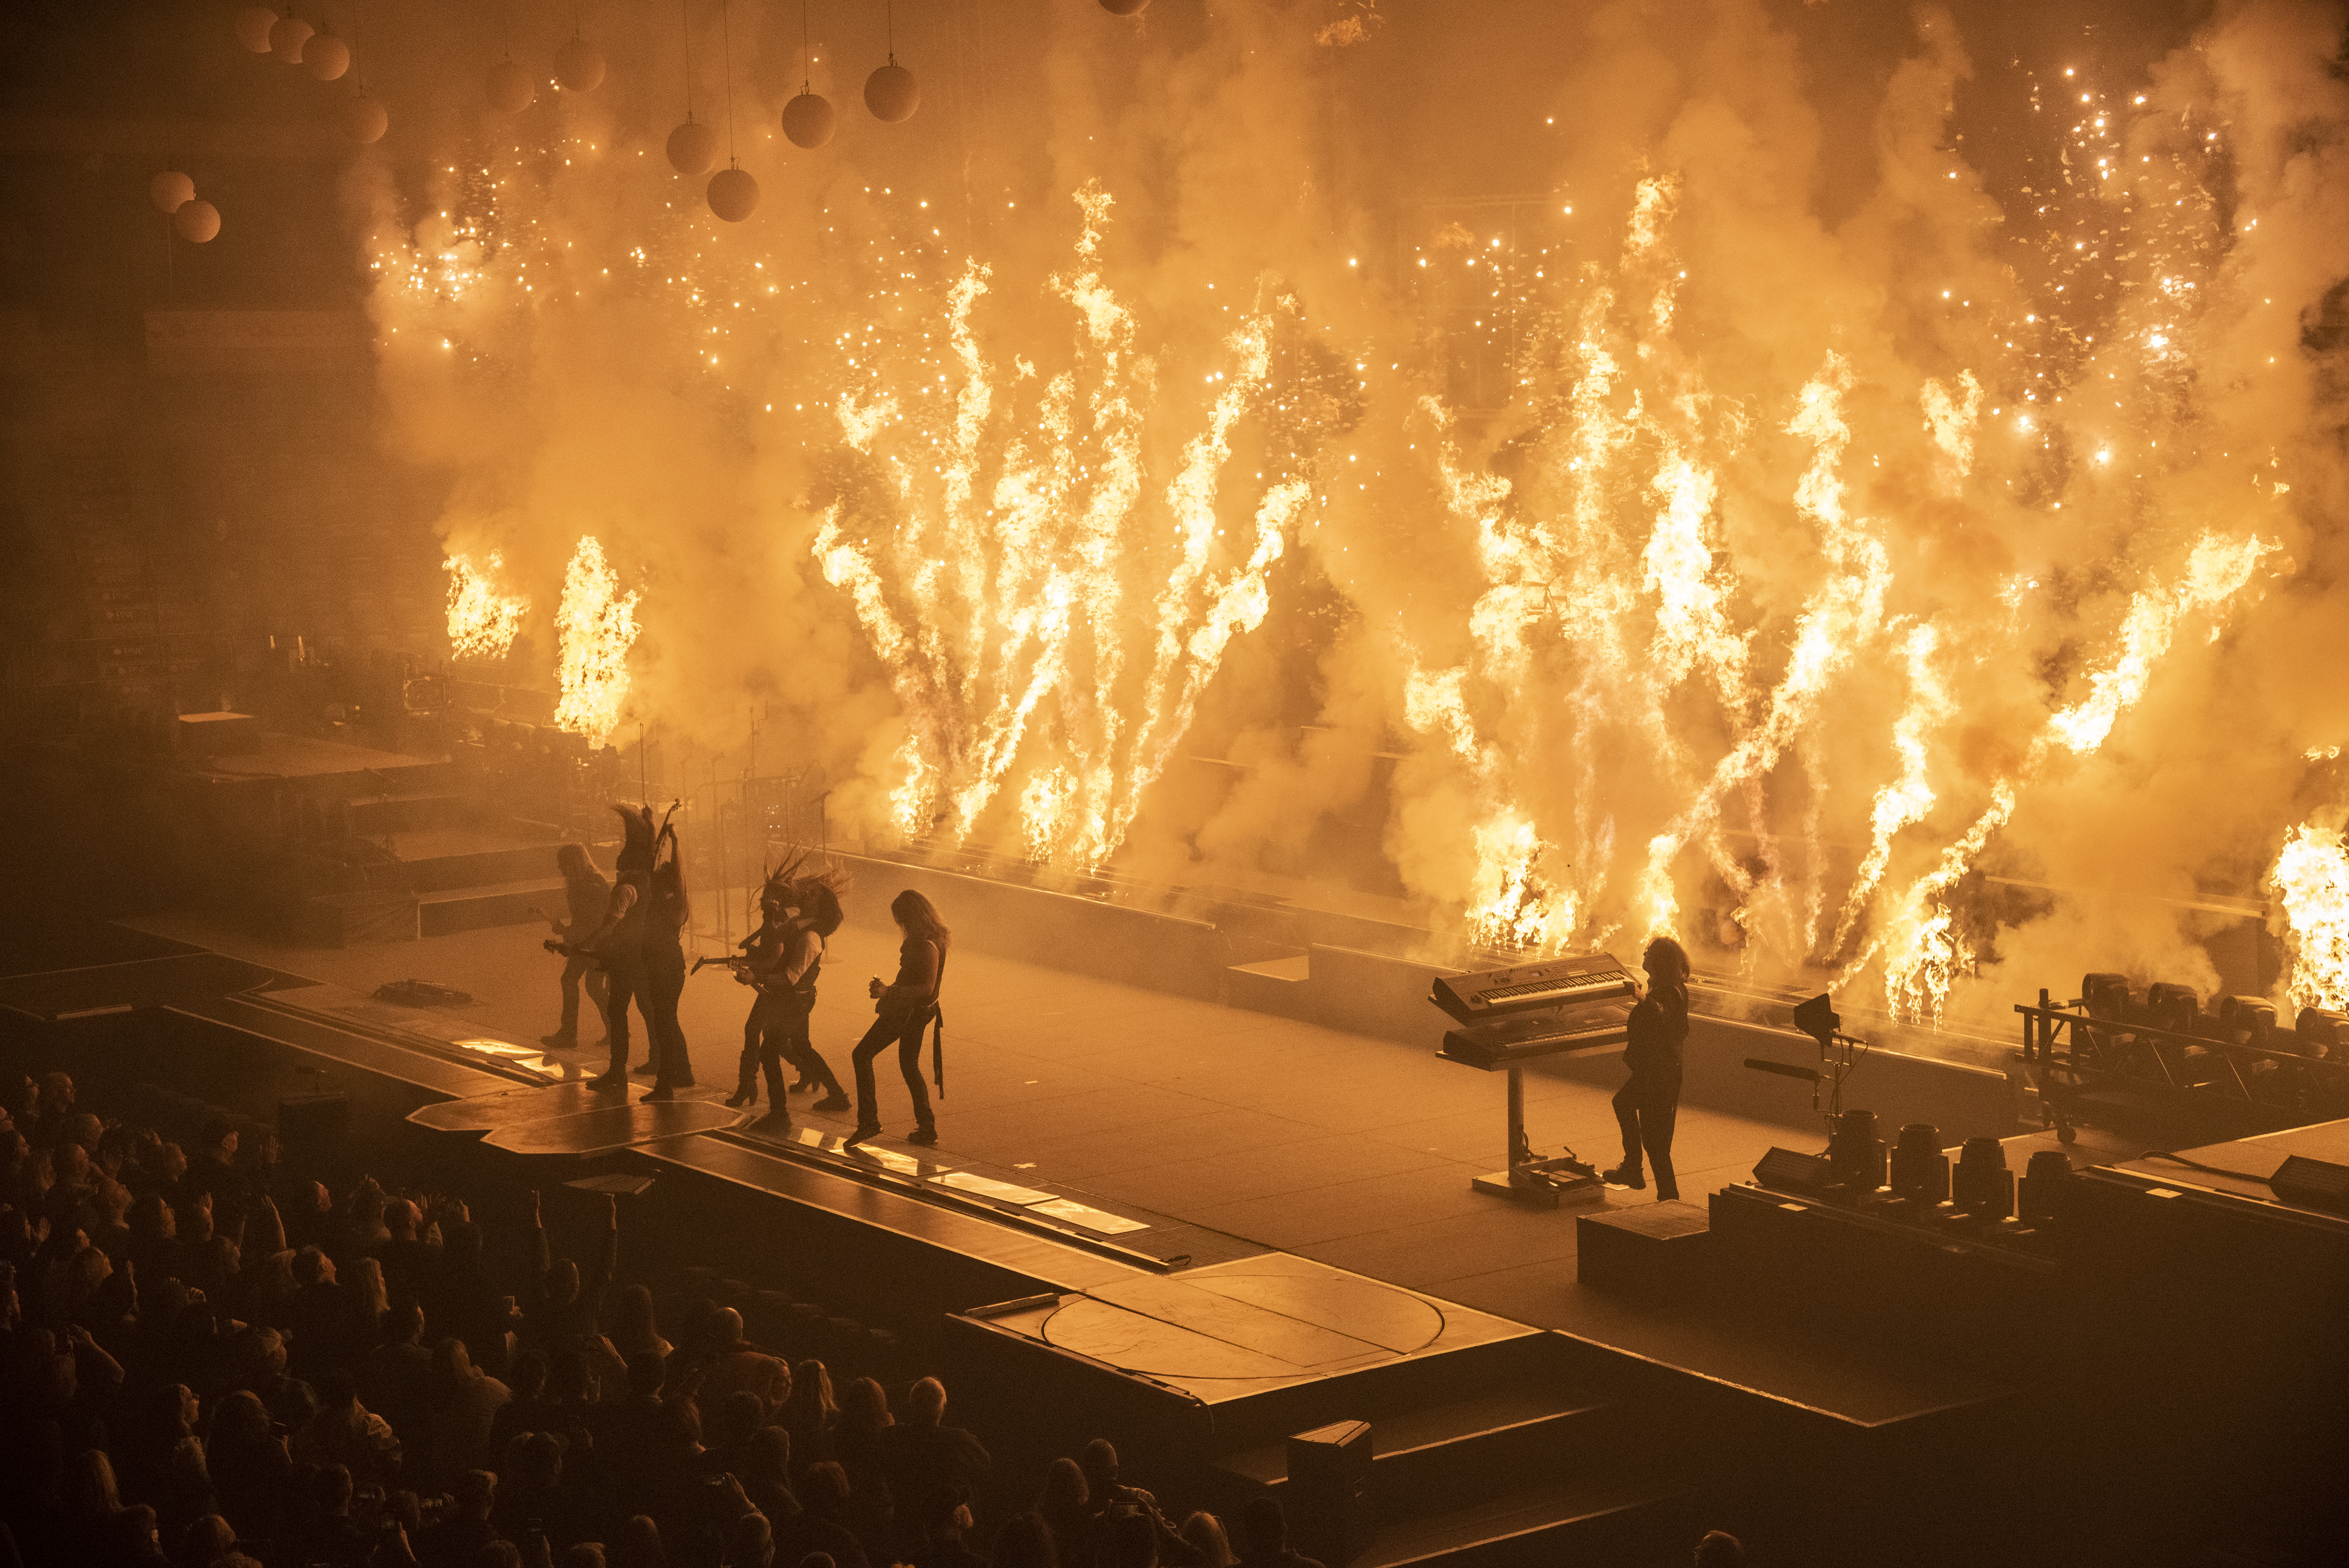 UPCOMING: Trans-Siberian Orchestra announces 2022 winter tour